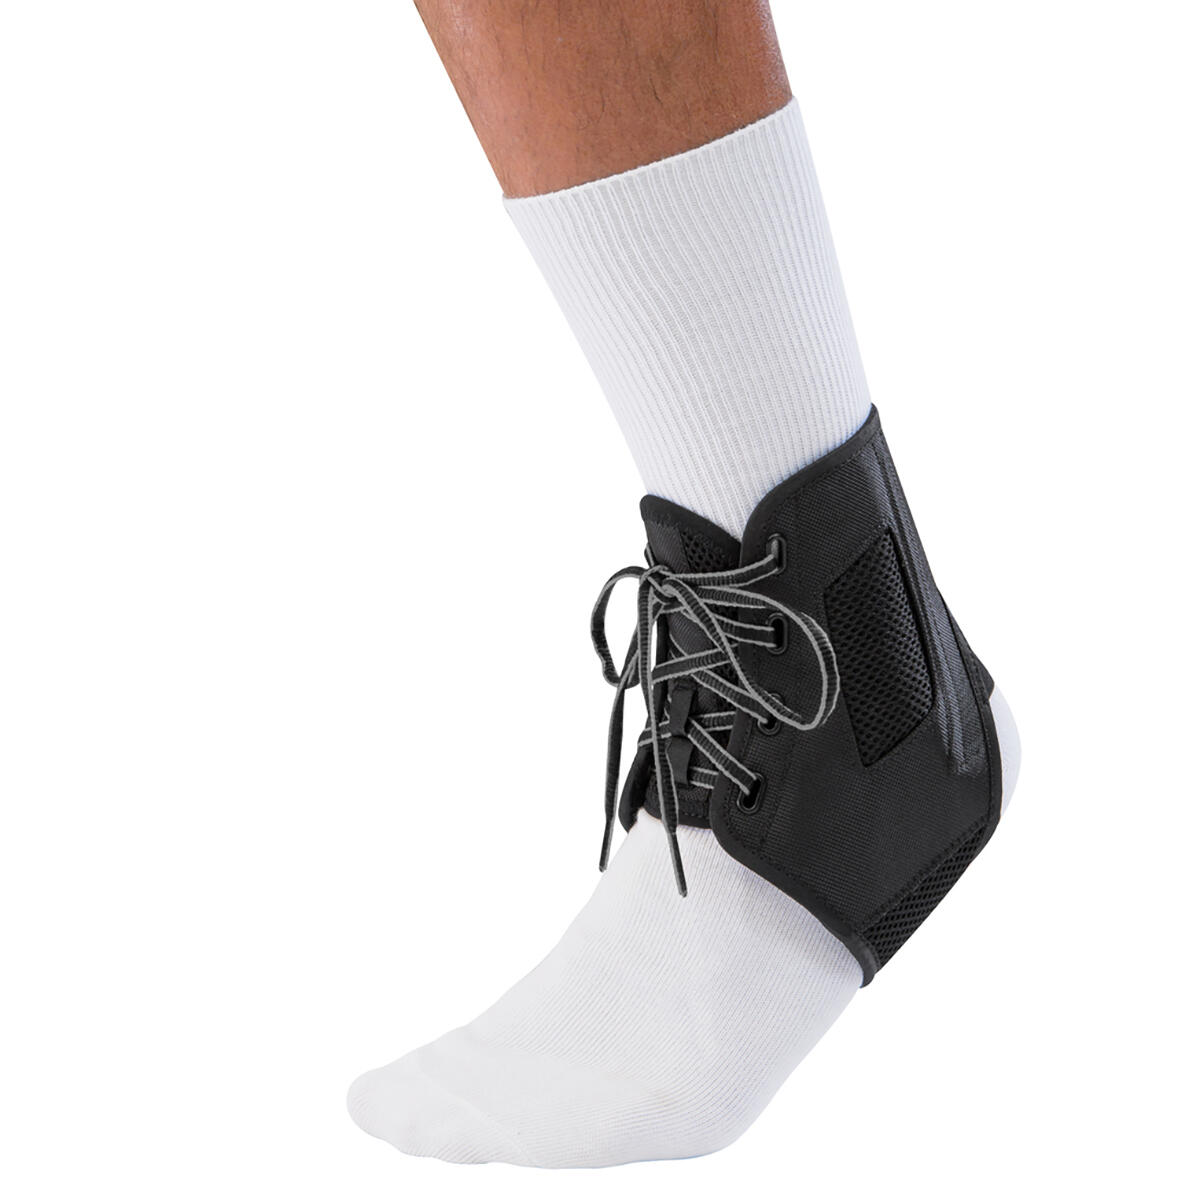 Mueller Ankle Brace Adjust to Fit Laced Firm Support - Small 2/3